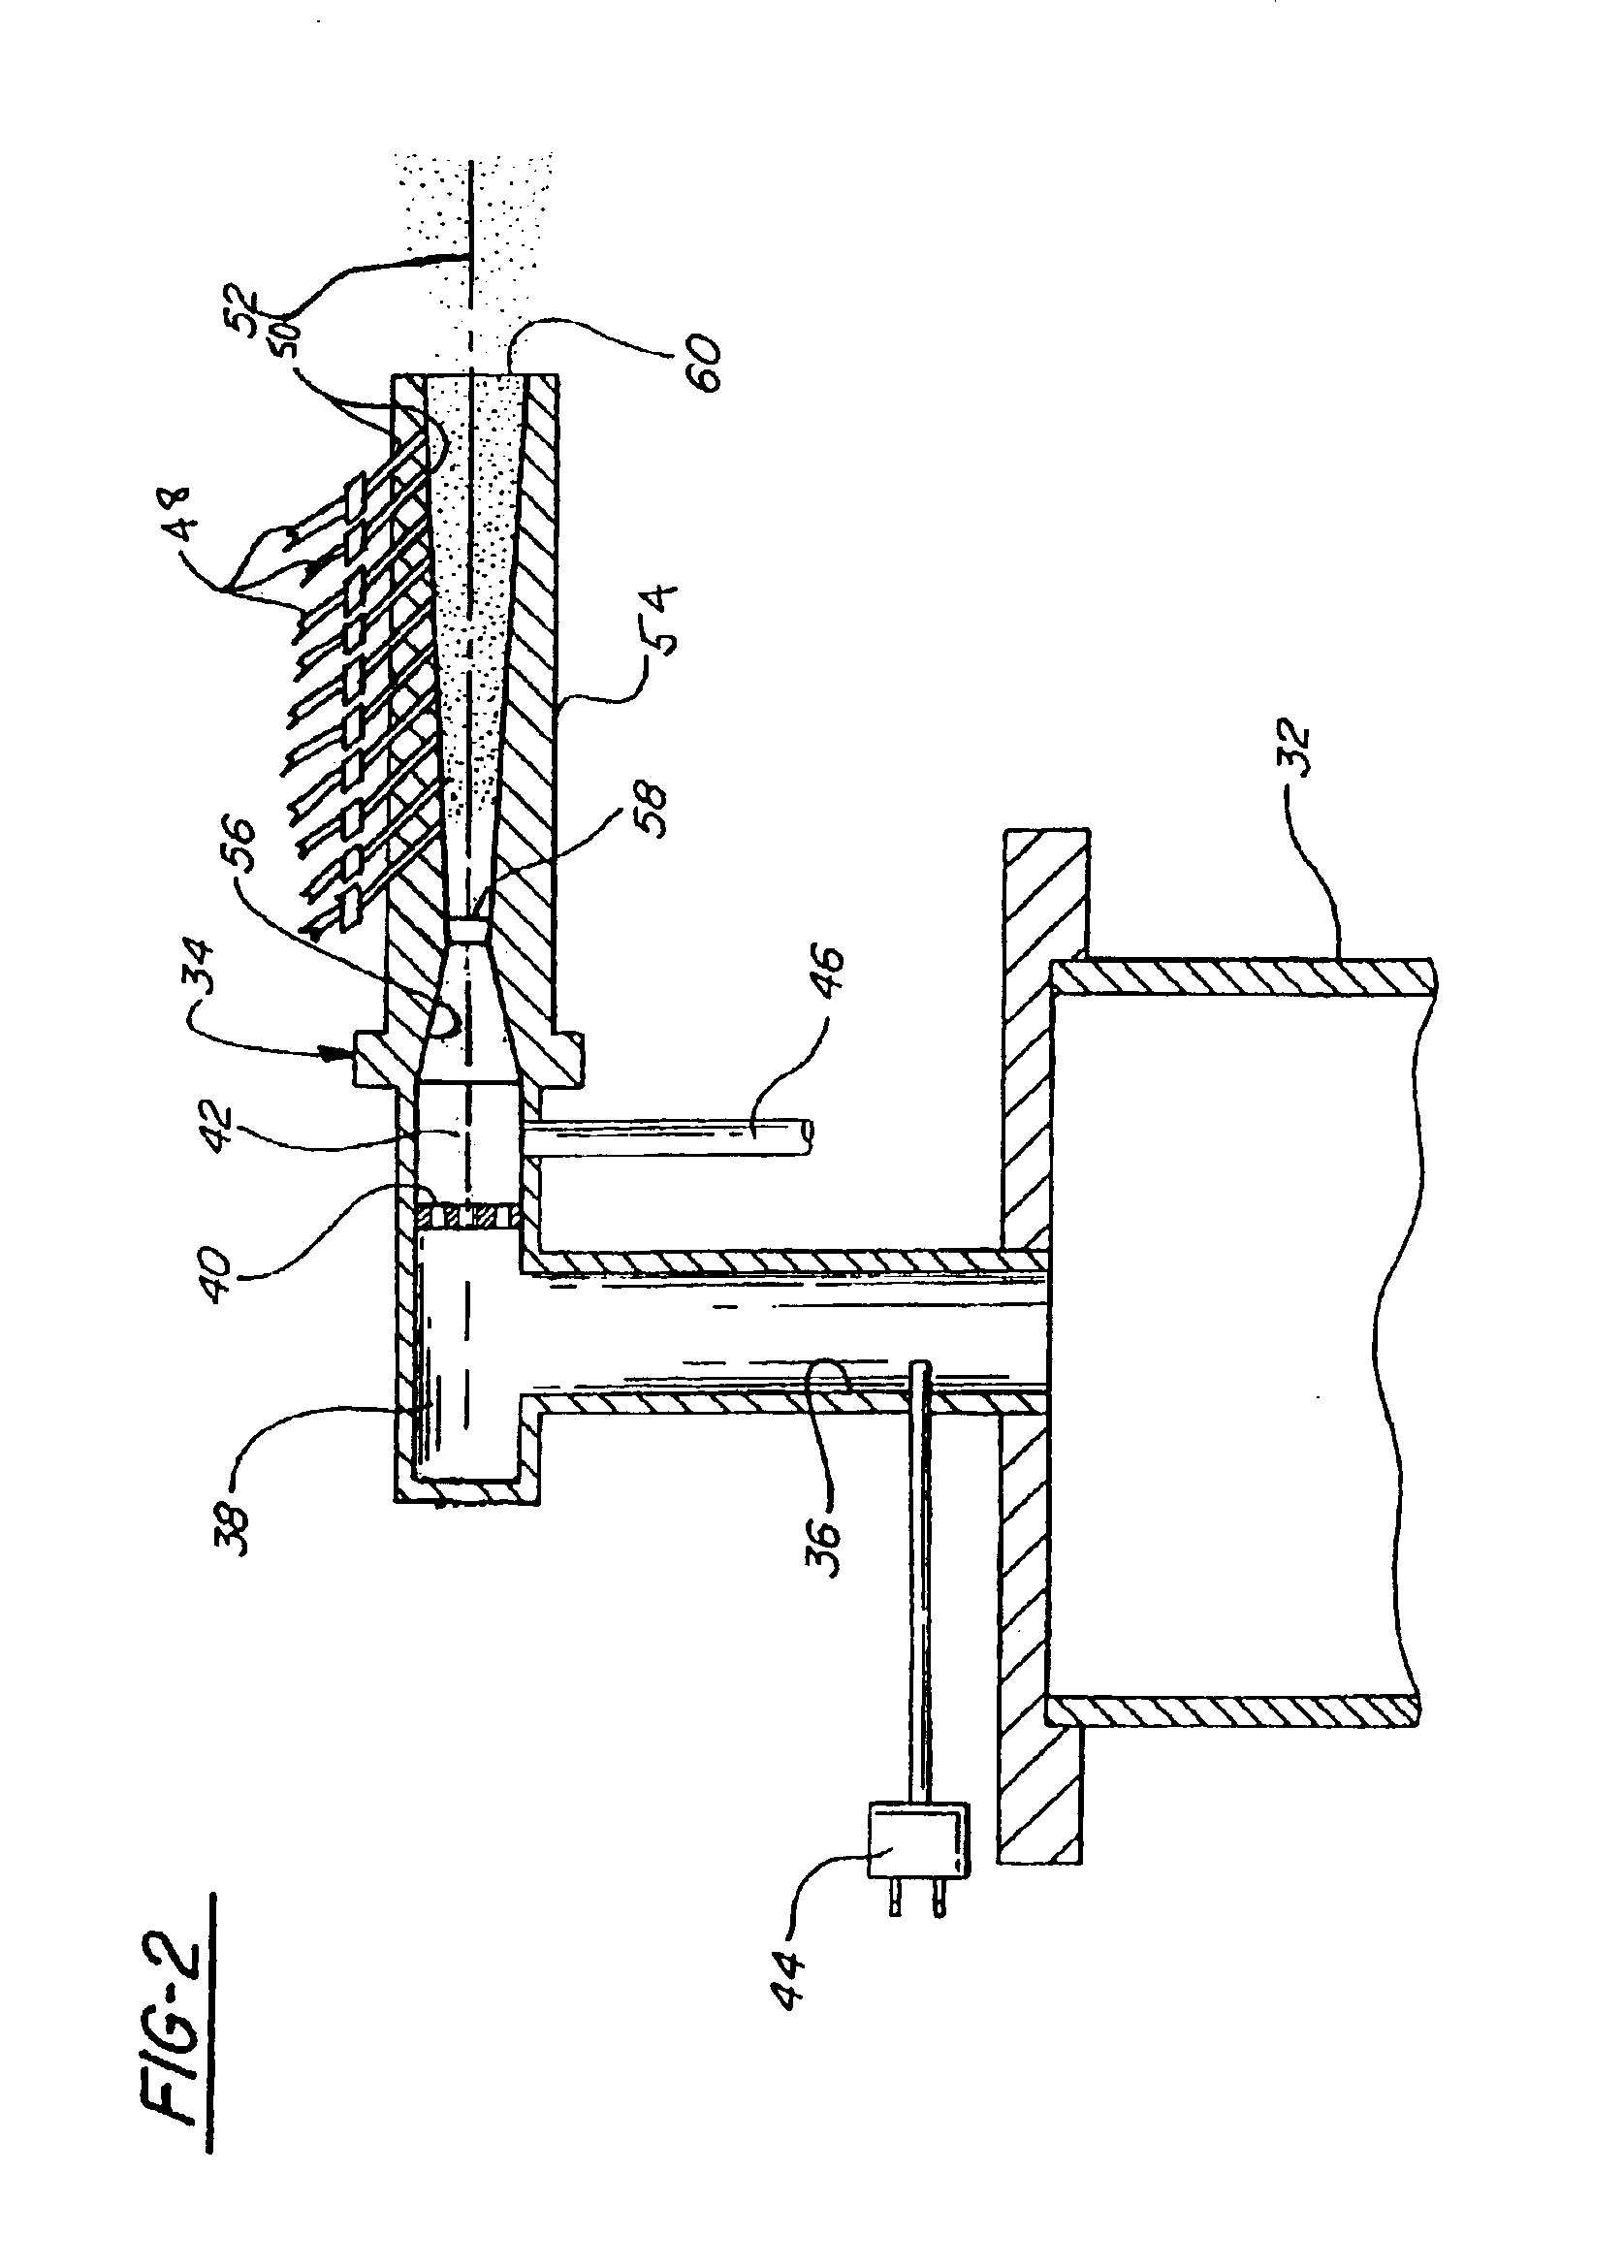 Method for producing electrical contacts using selective melting and a low pressure kinetic spray process